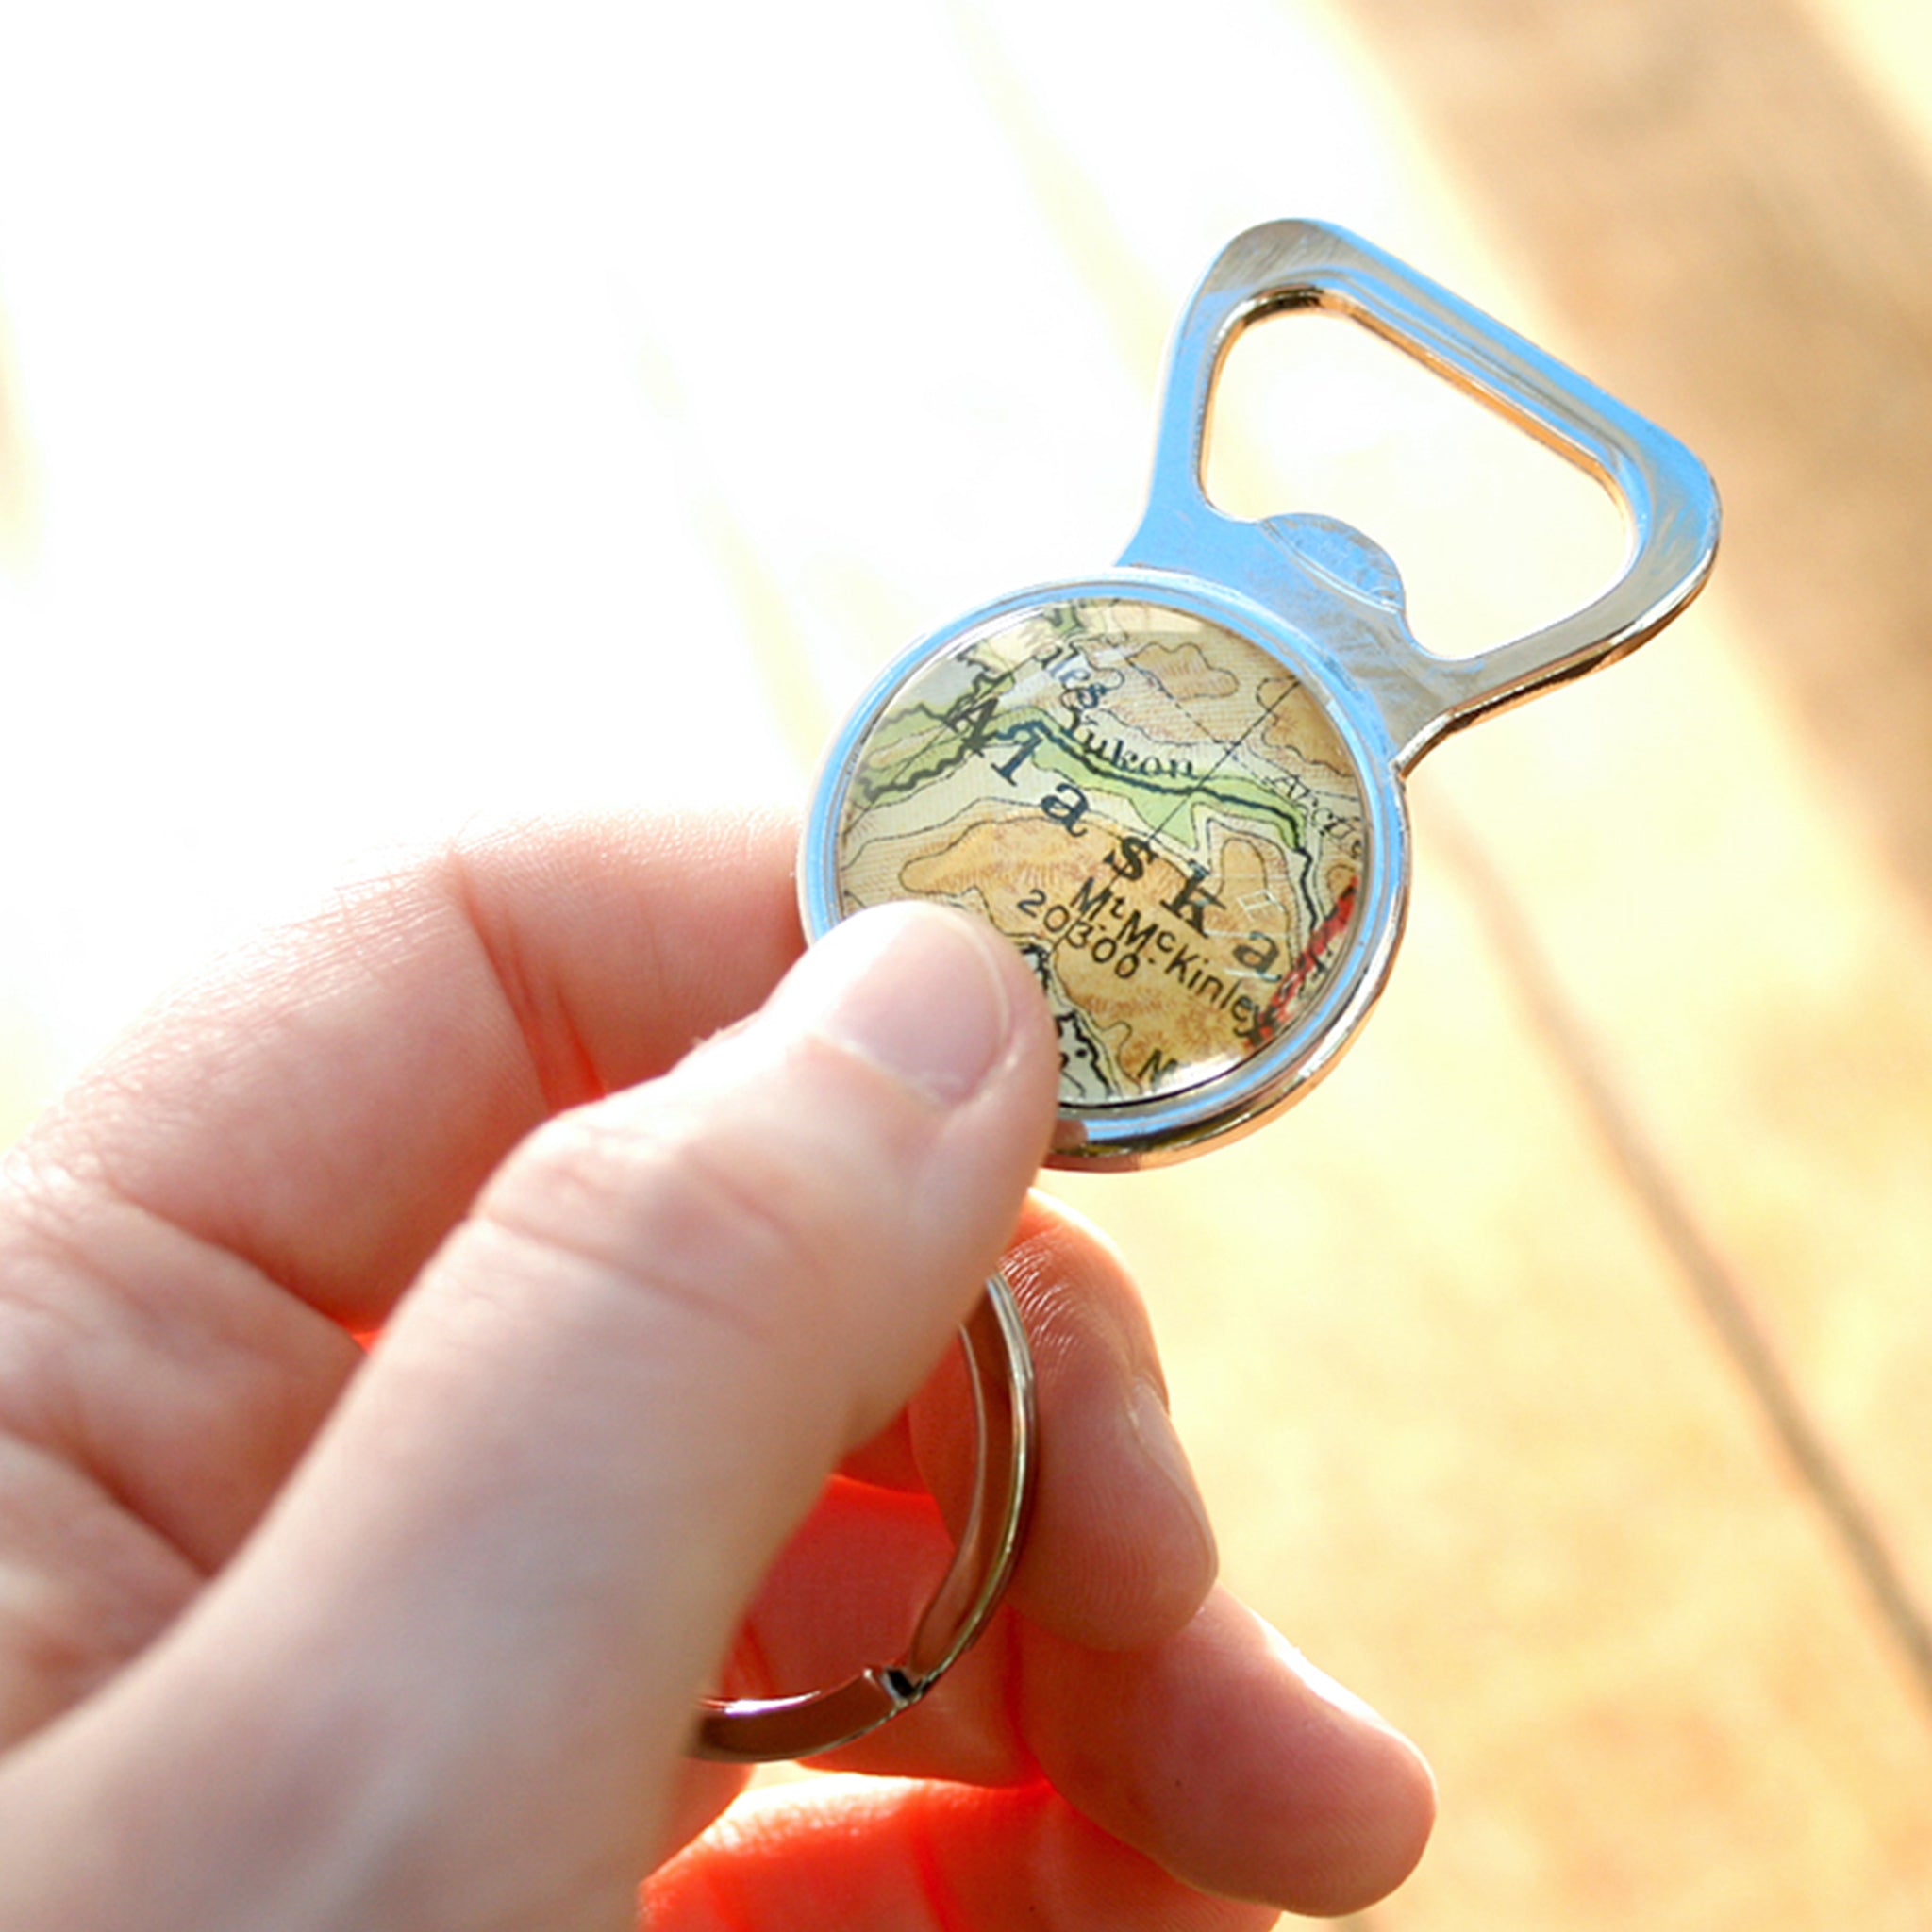 Hand holding personalised Bottle Opener with map of Alaska featured